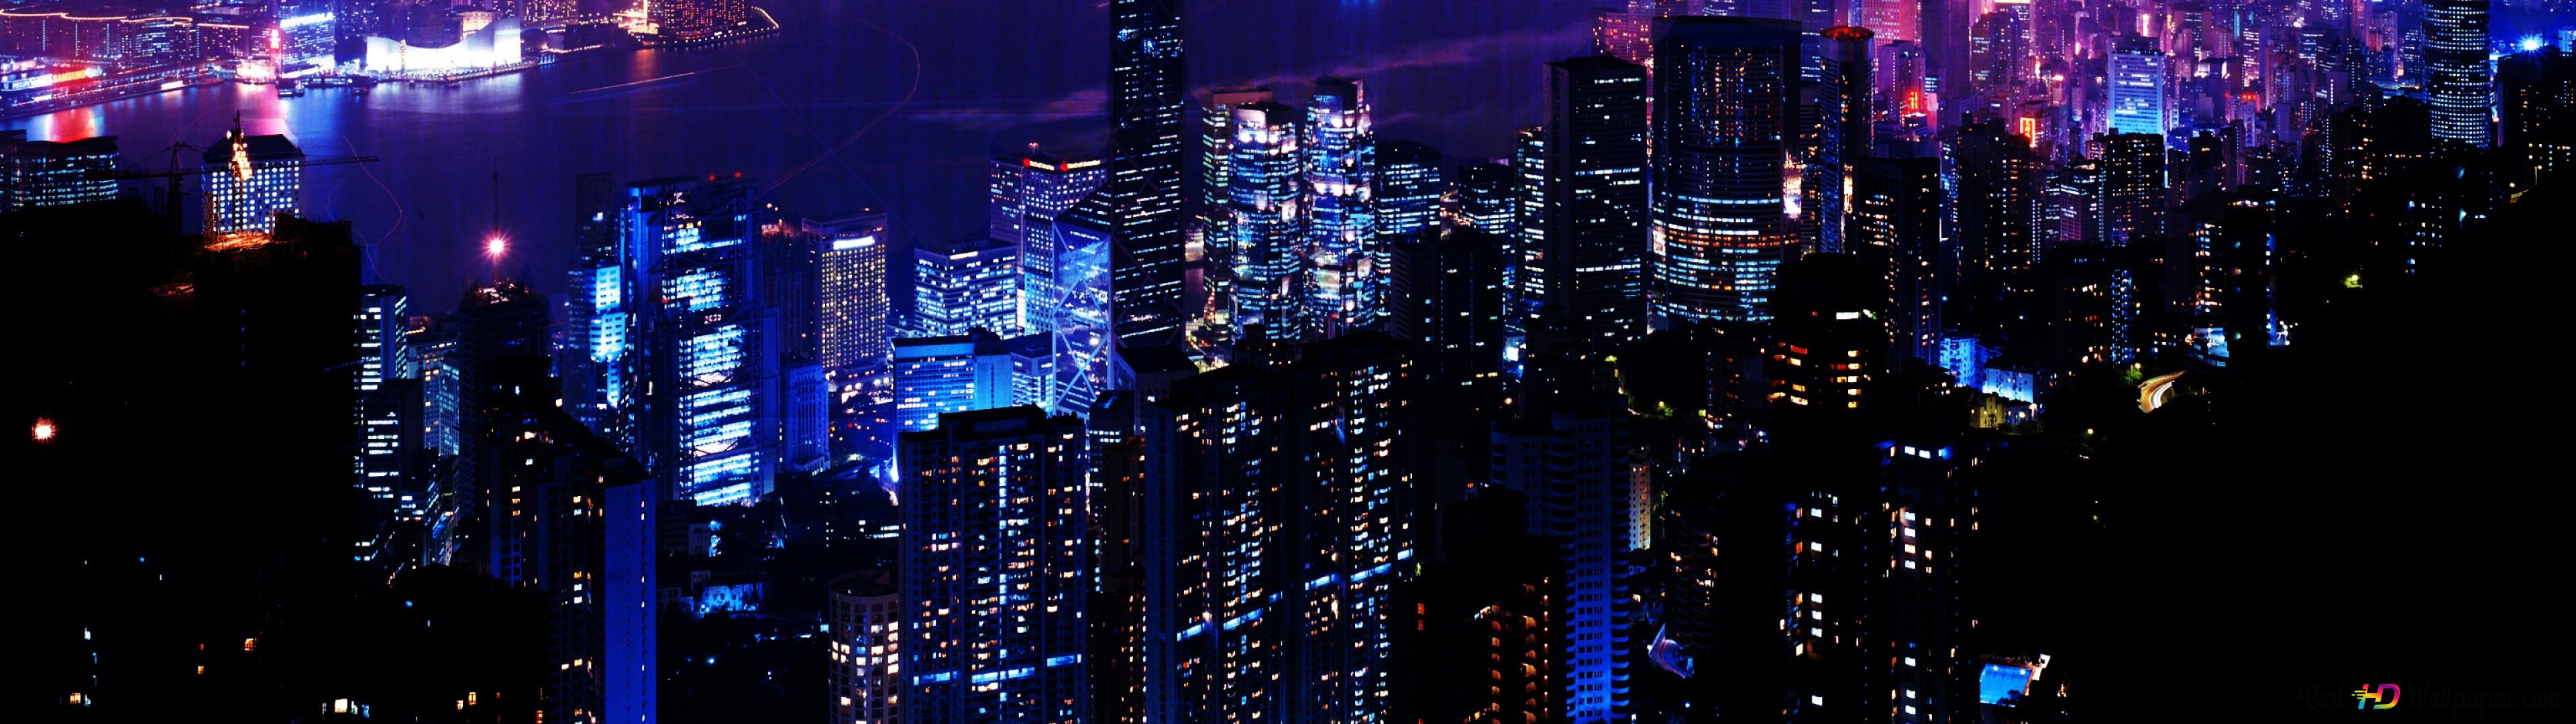 A city at night with skyscrapers lit up in blue and purple lights. - Anime city, city